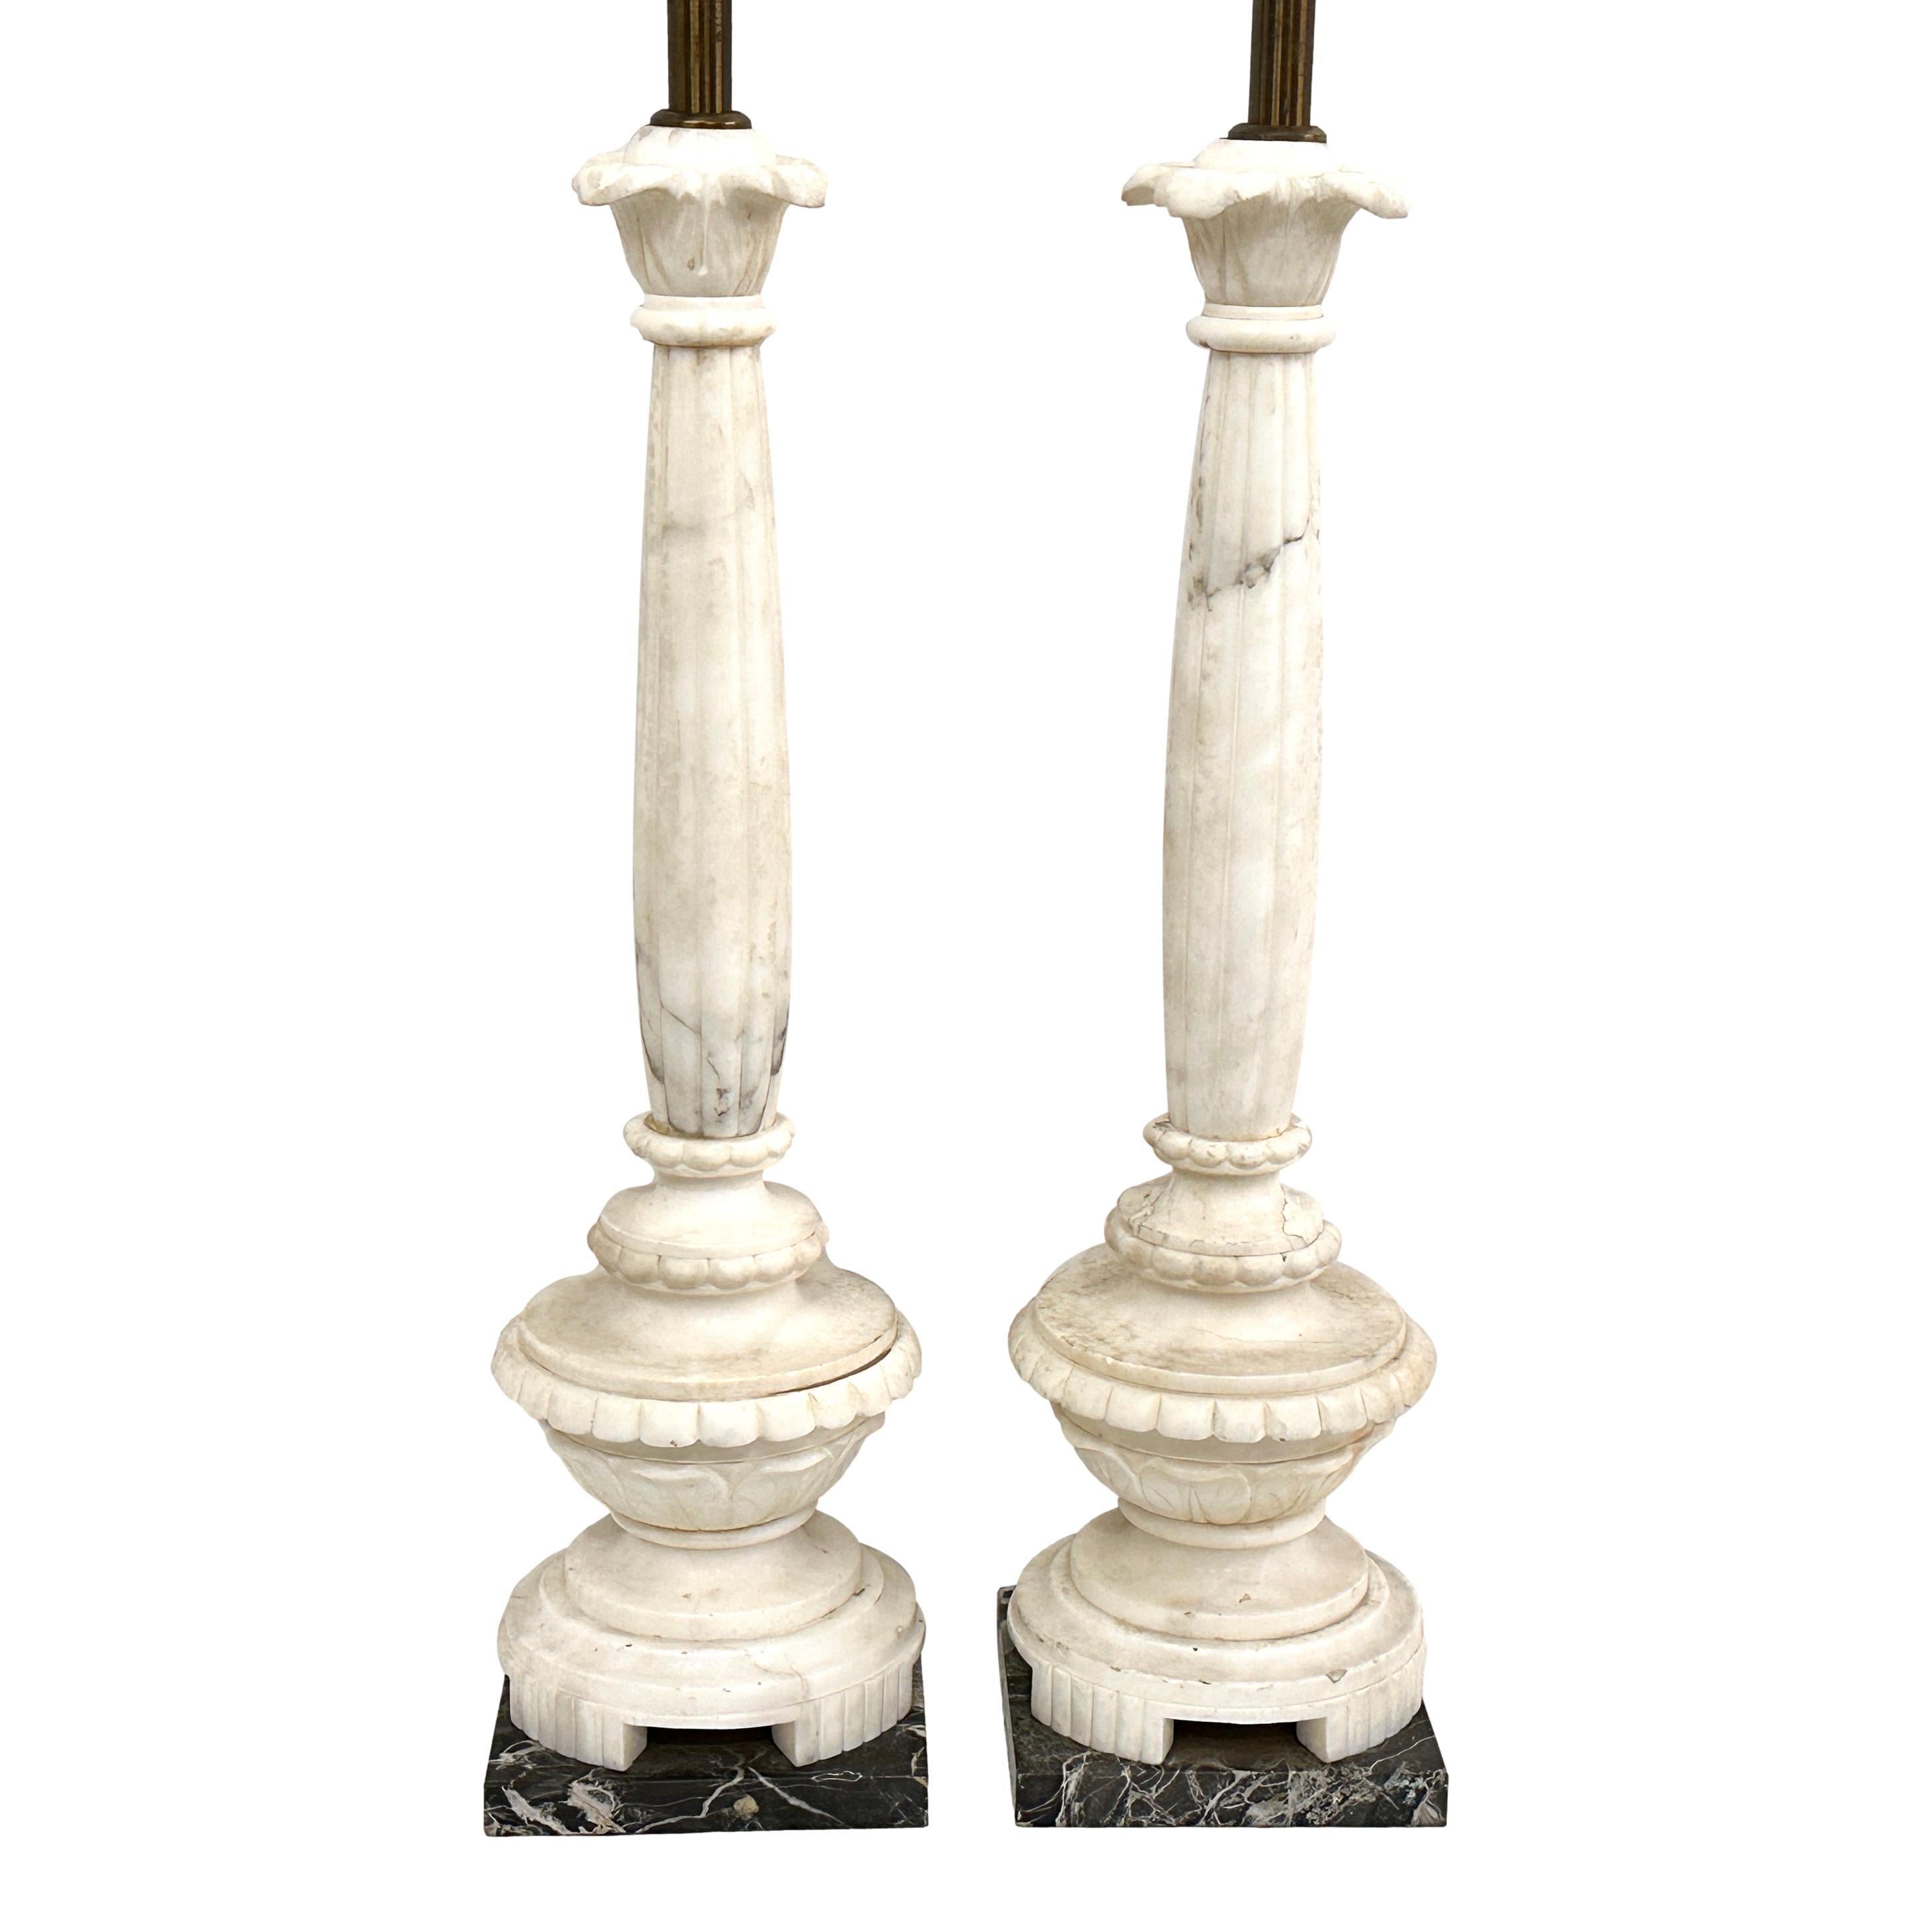 Pair of circa 1930's Italian column-shaped alabaster lamps with black marble bases.

Measurements:
Height of body: 22